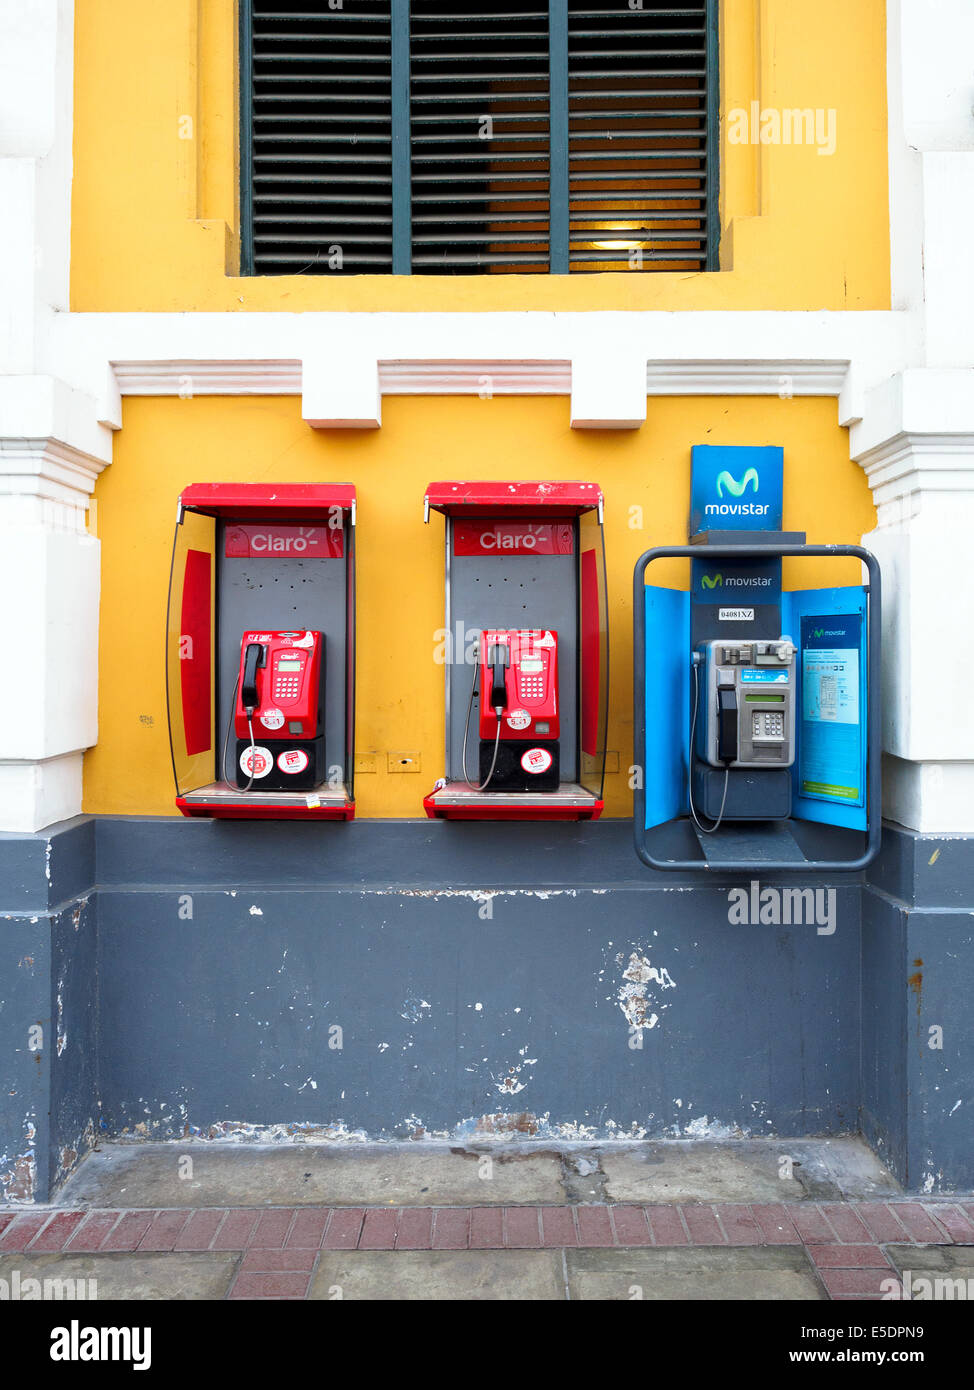 Claro and moviestar public phones in the district of Barranco - Lima, Peru Stock Photo